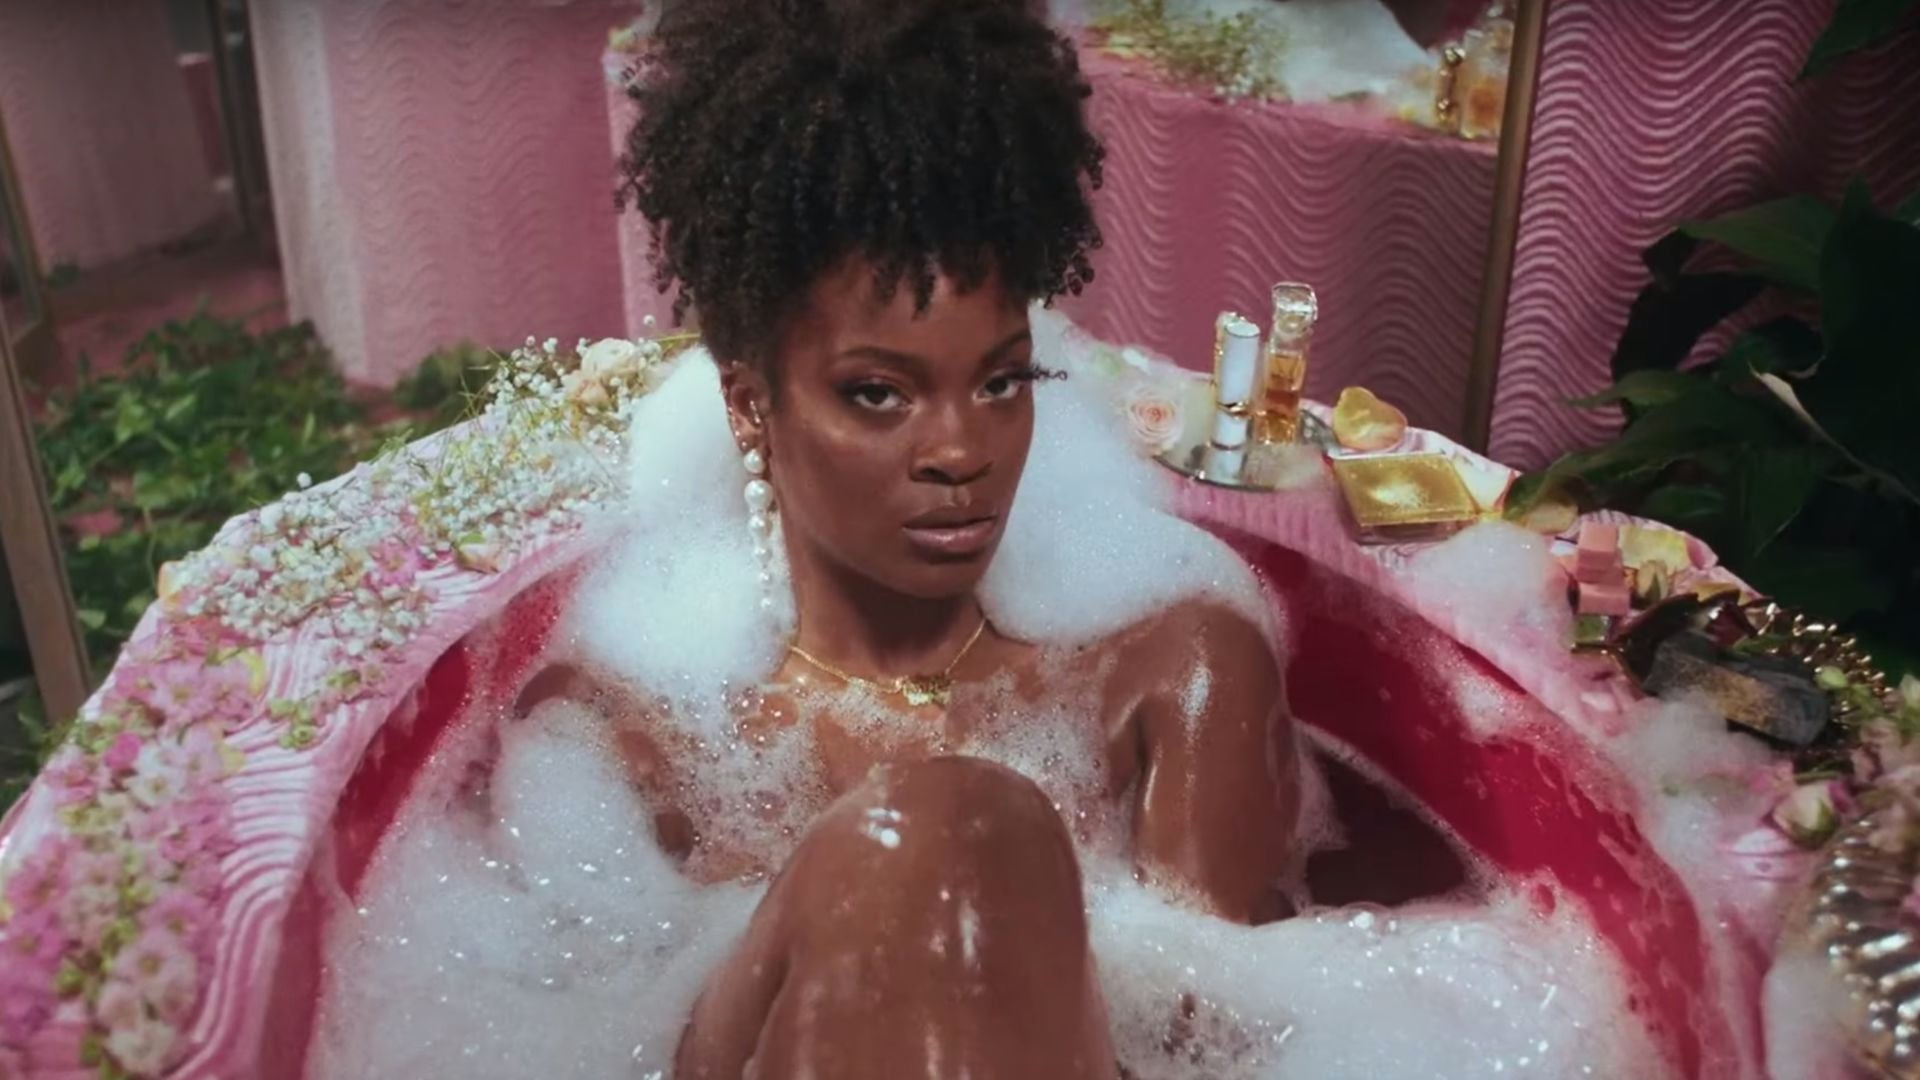 Ari Lennox Pays Homage To Missy Elliott And Total In New Music Video For 'BMO'